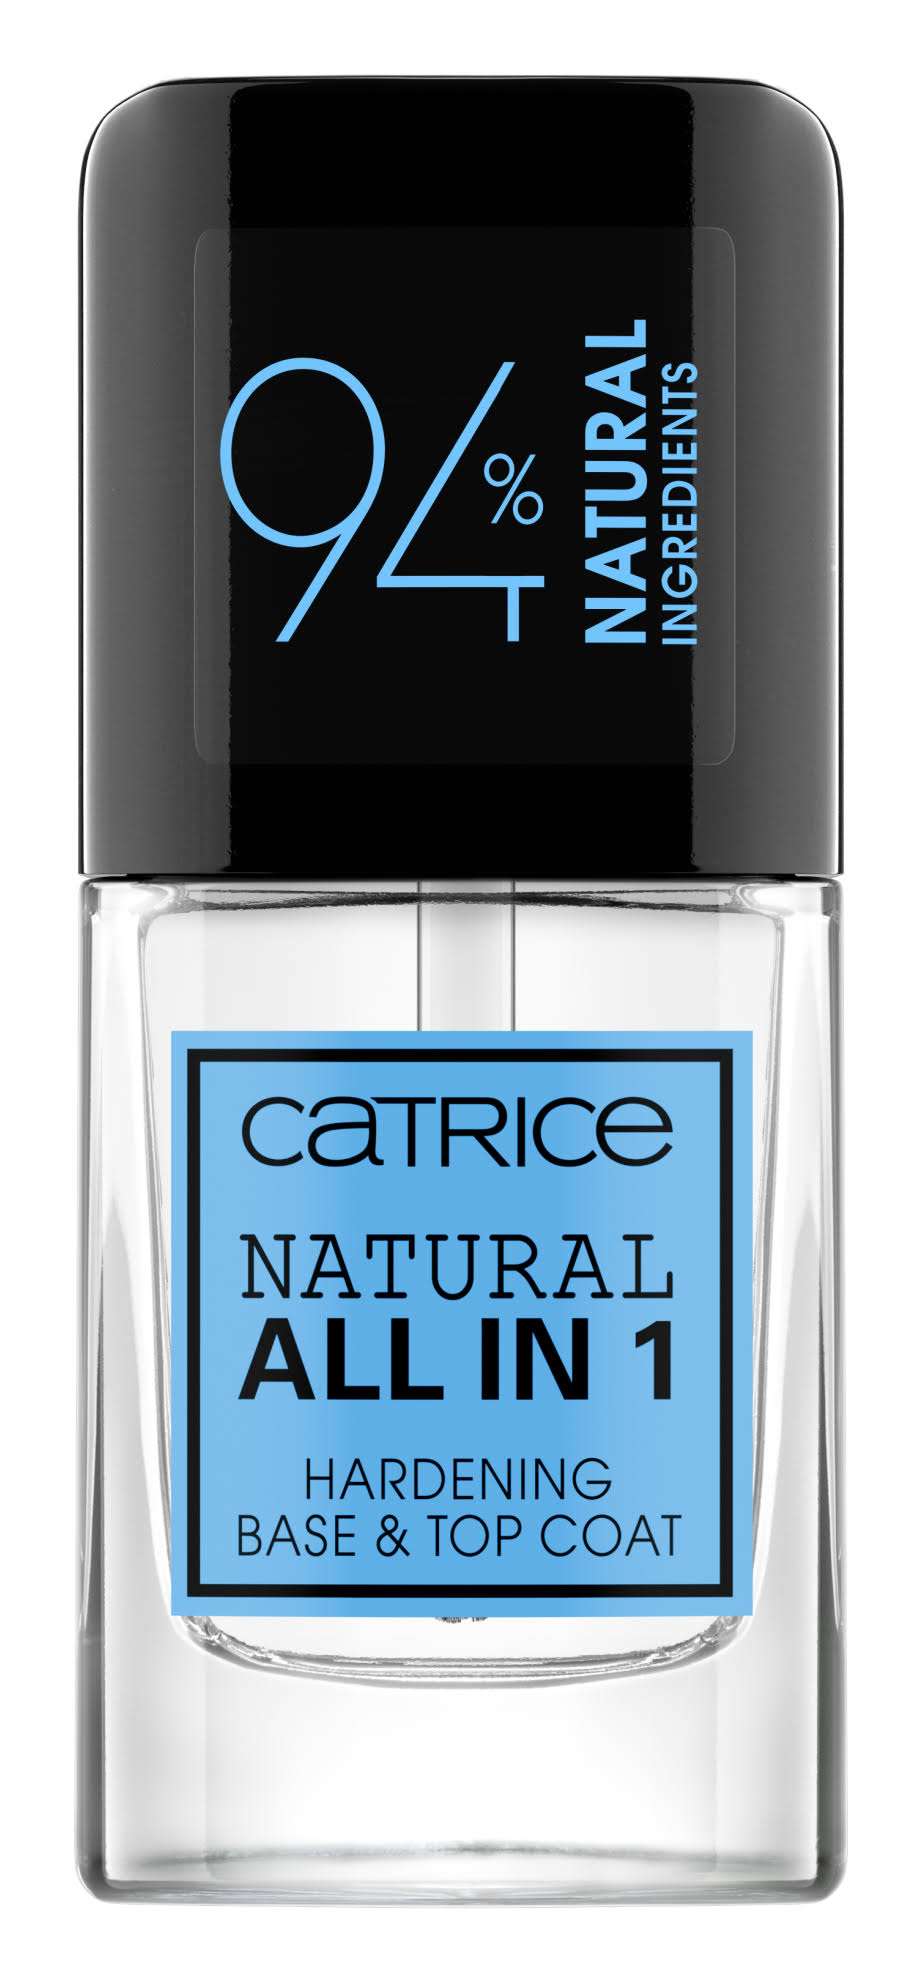 Catrice Natural All in 1 Hardening Base & Top Coat 10.5 ml